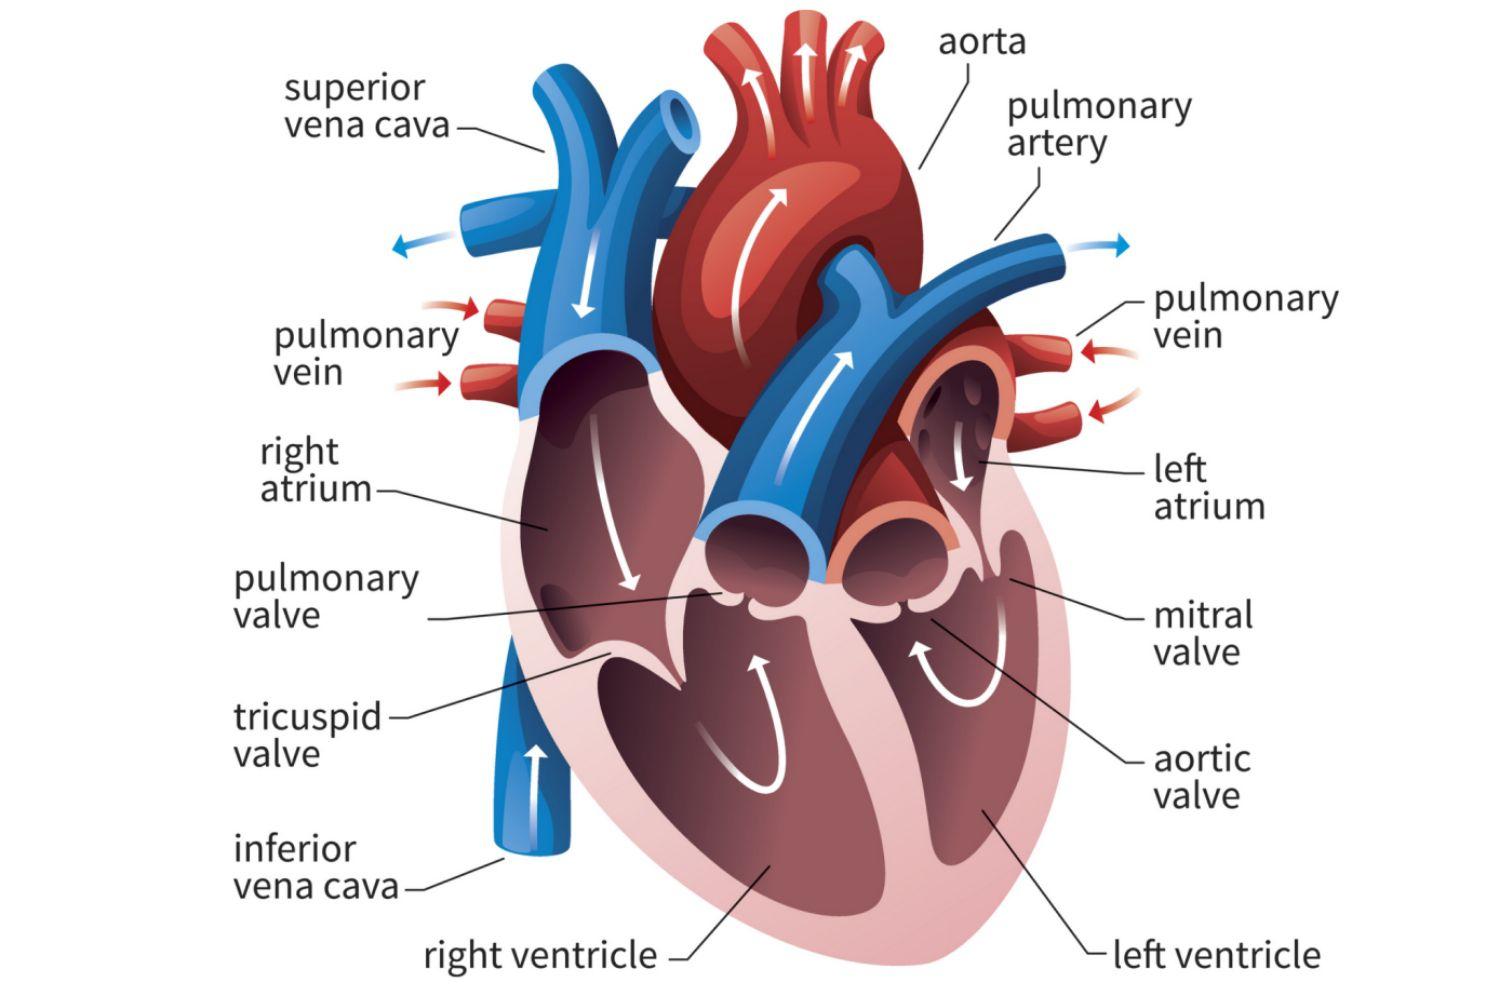 Blood Flow Through The Heart Diagram The Function Of The Heart Ventricles